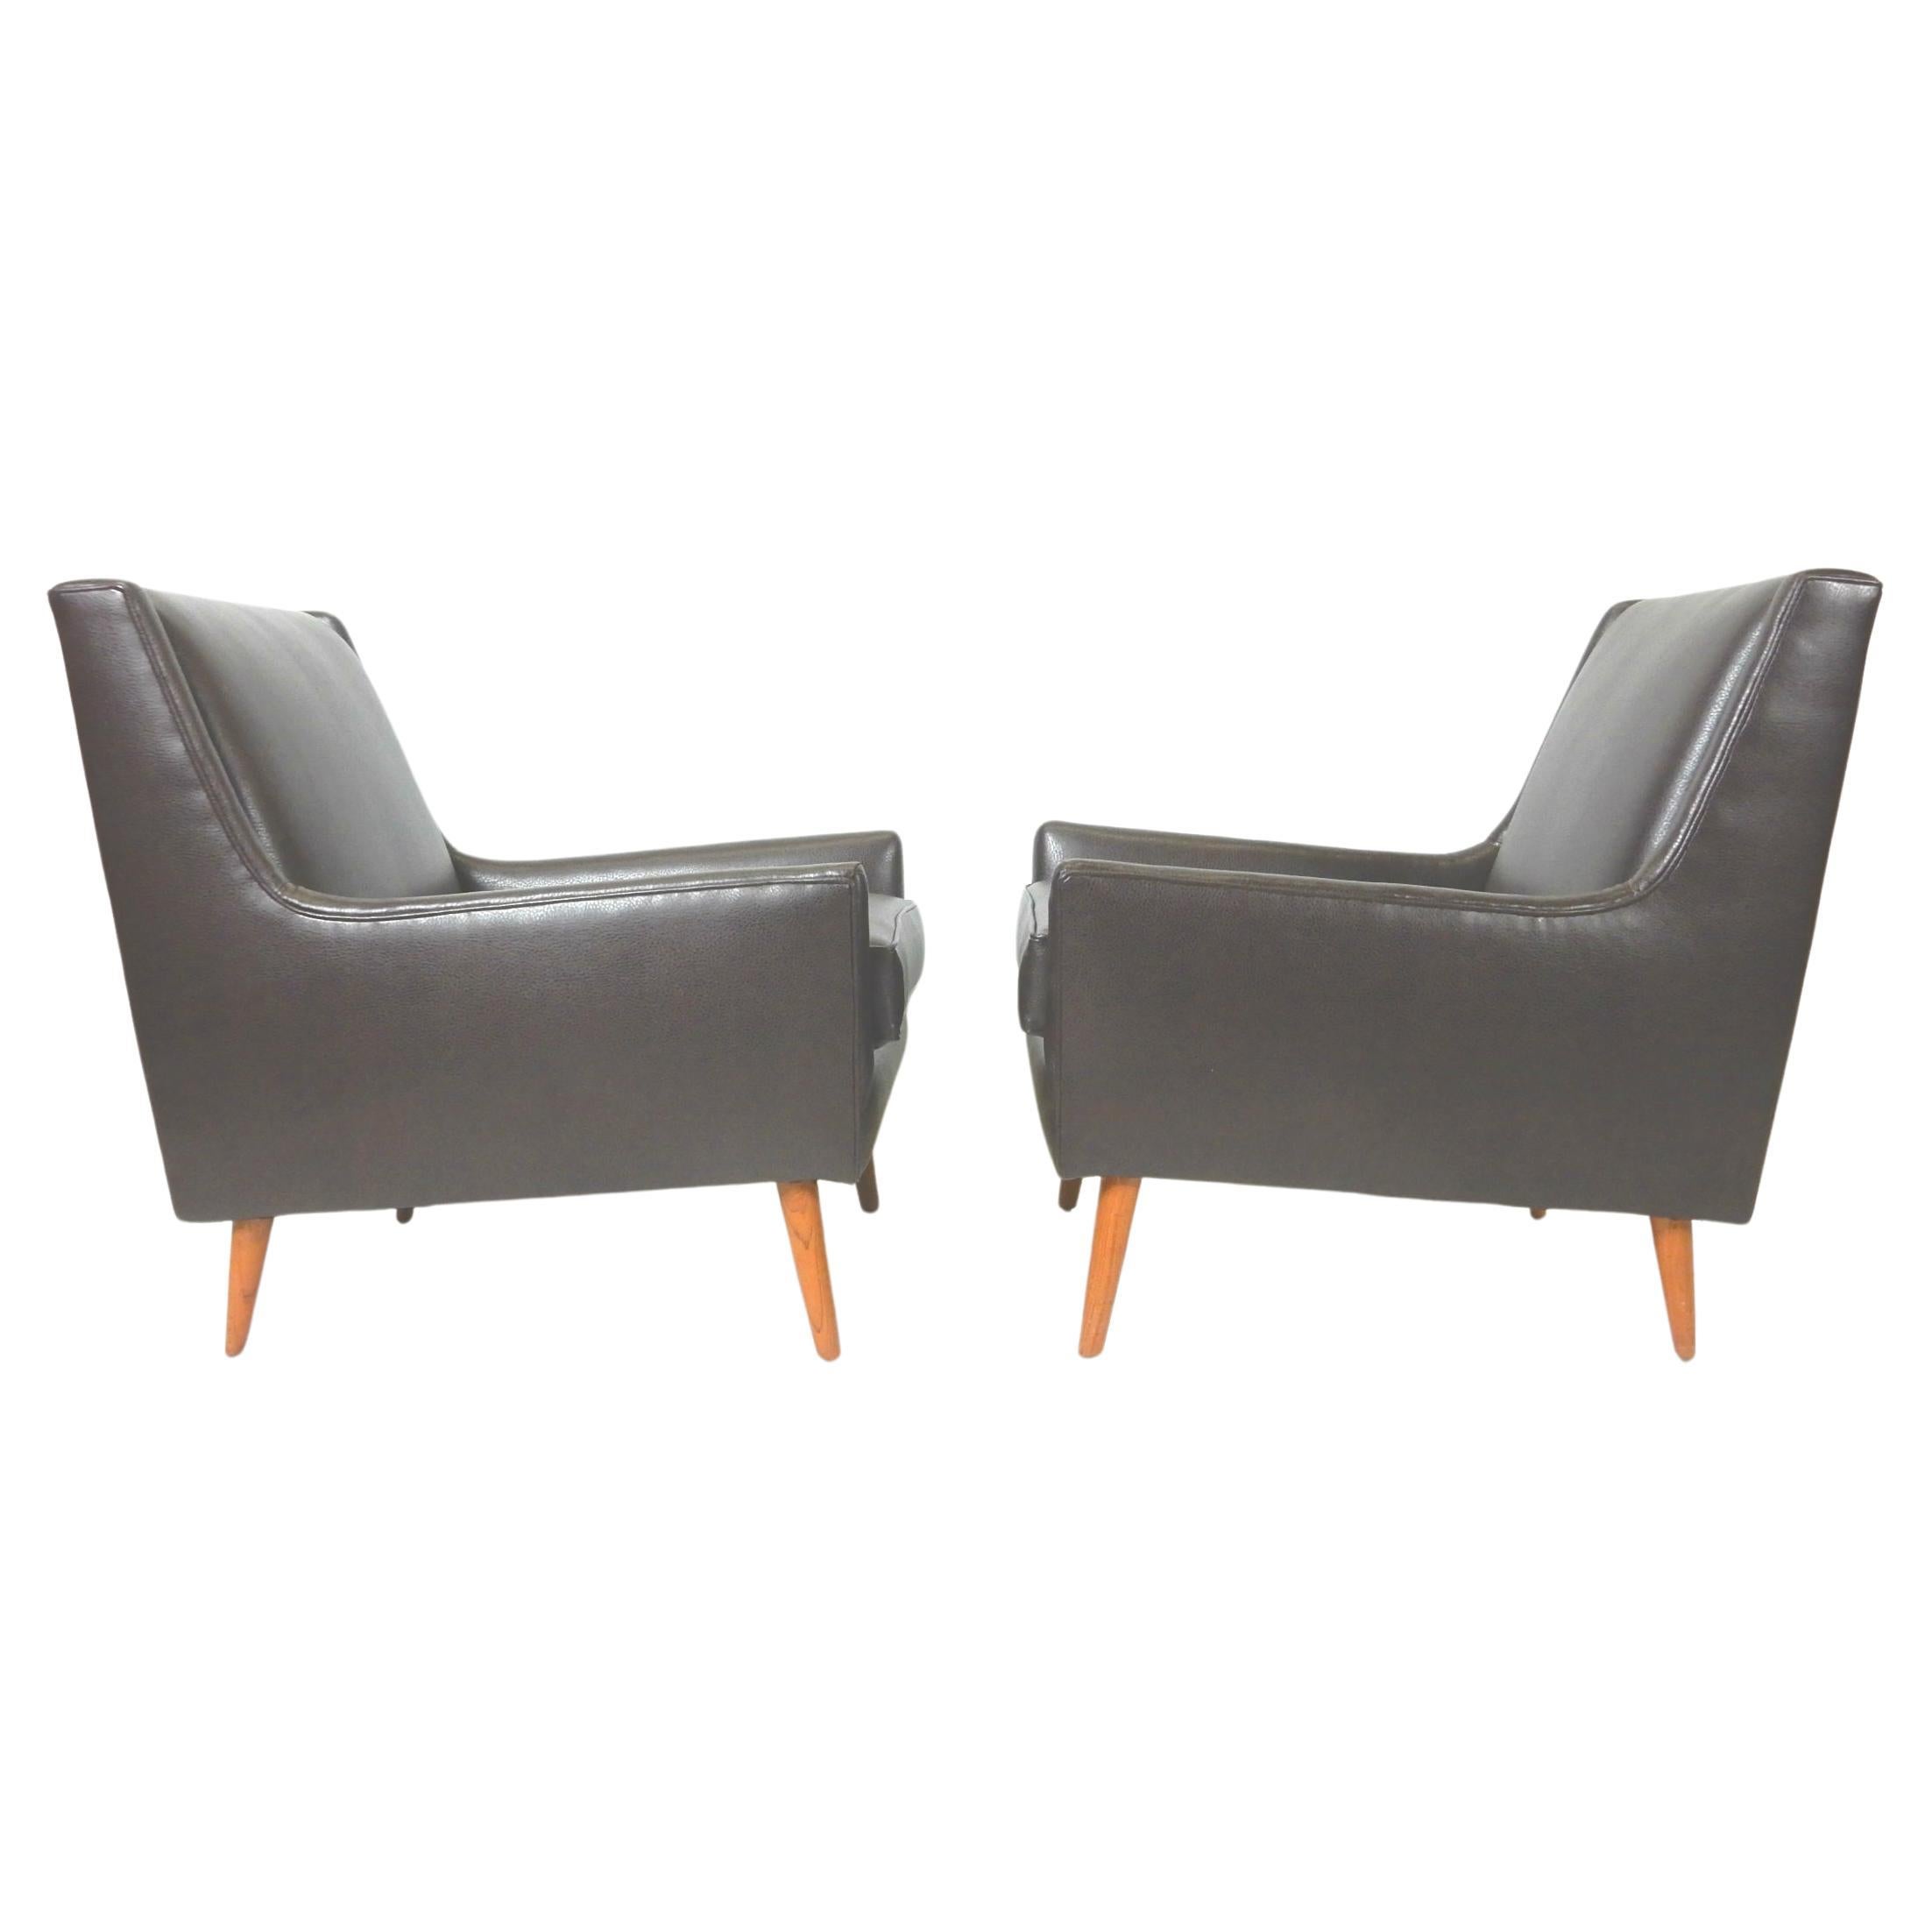 1950s Mid-Century Modern Lounge Chair Pair In Good Condition For Sale In Las Vegas, NV